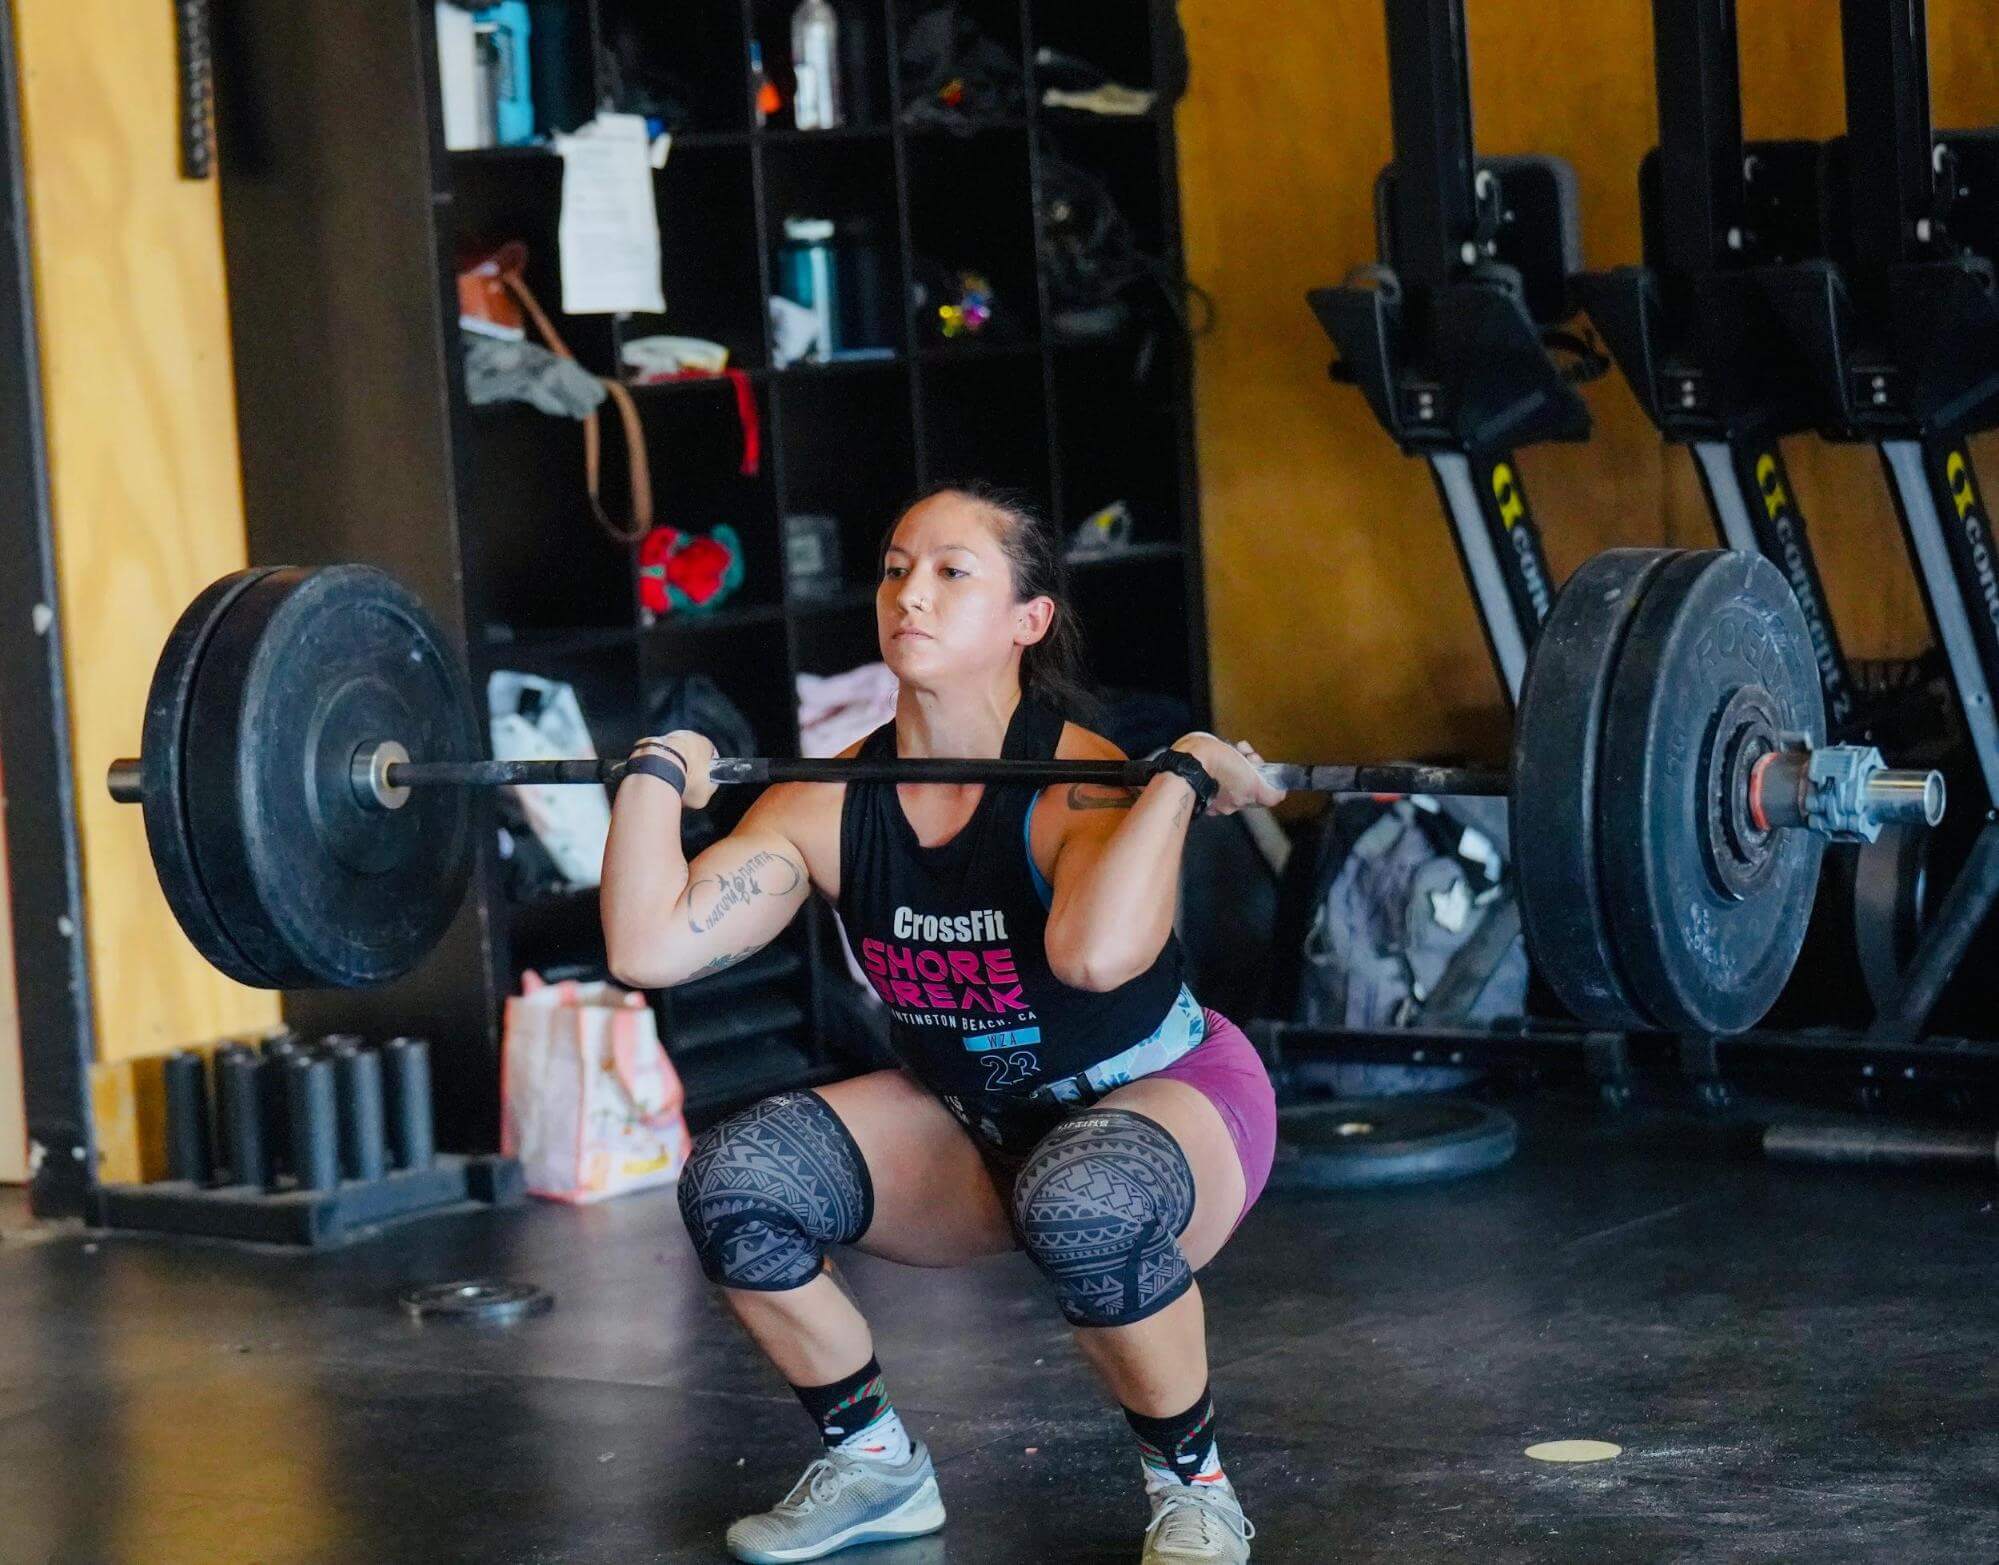 Dr. Jessica Crowder at the bottom of a barbell squat during a CrossFit workout in Orange County, CA.